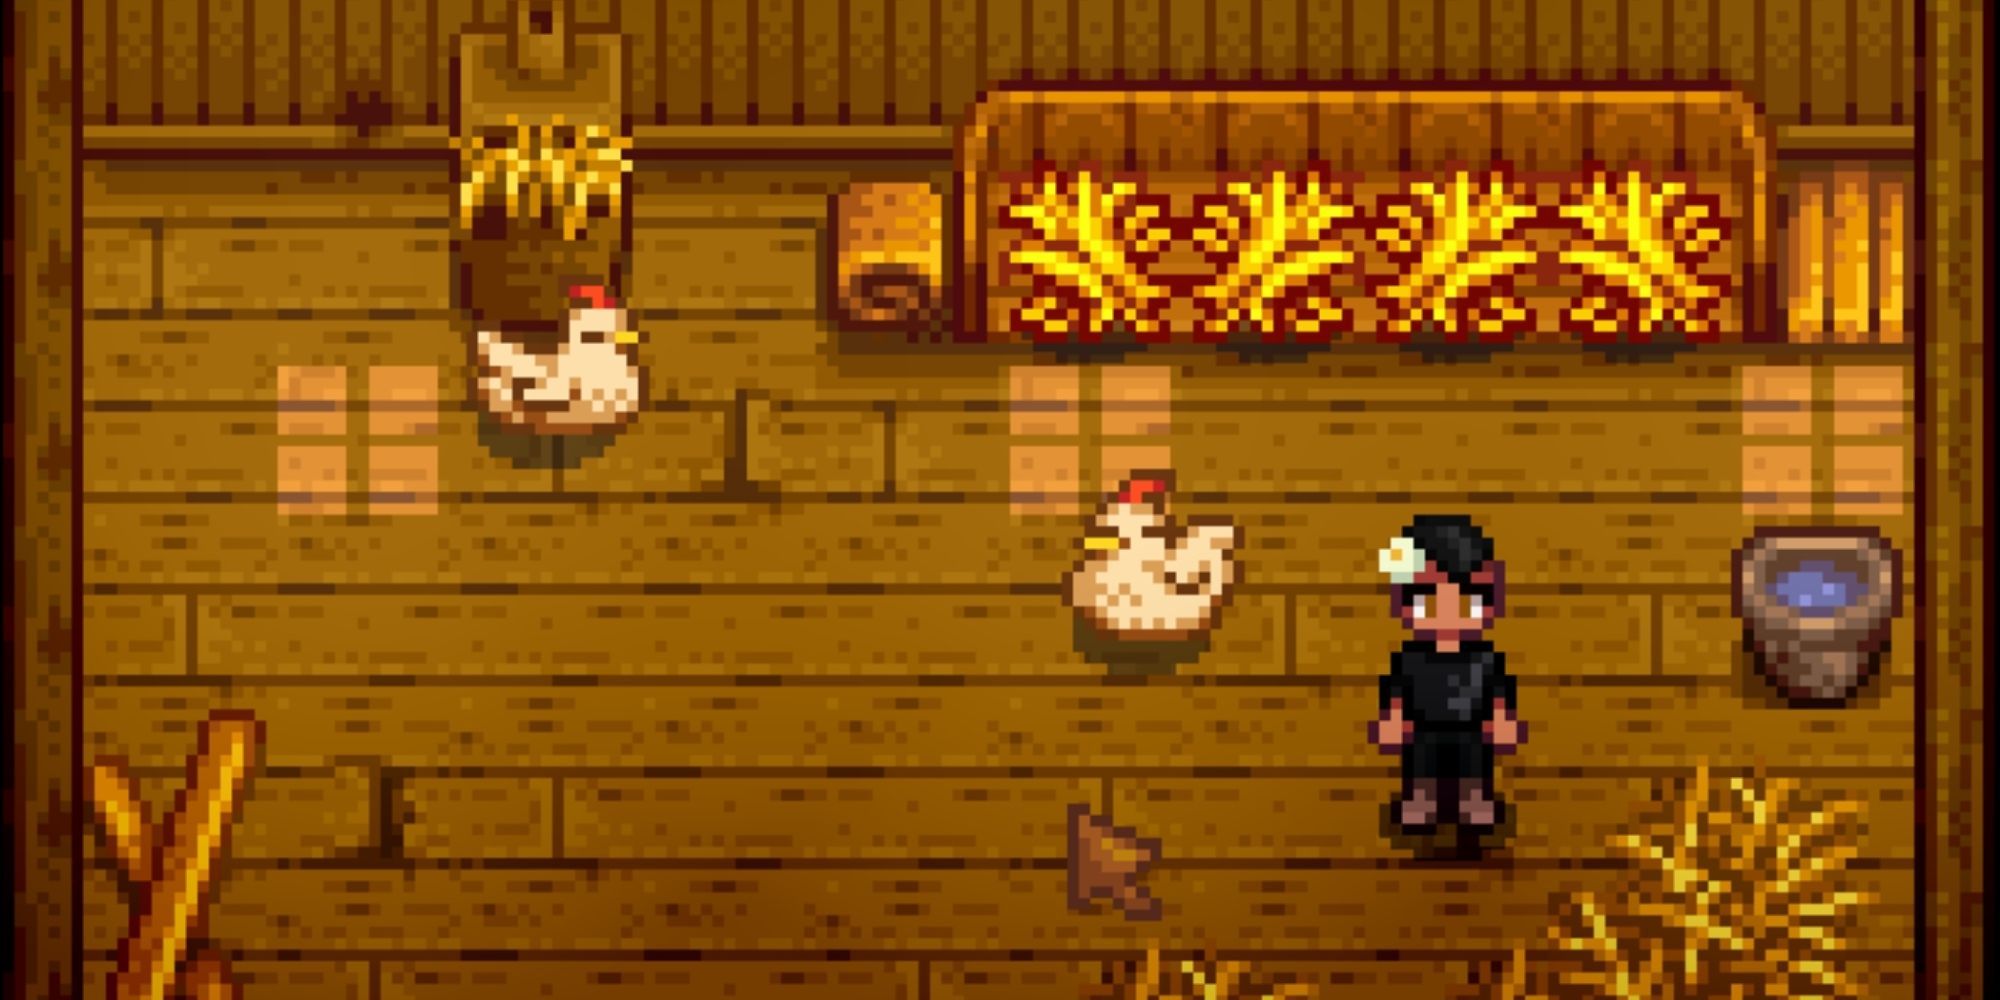 Stardew Valley - Chickens in a Coop